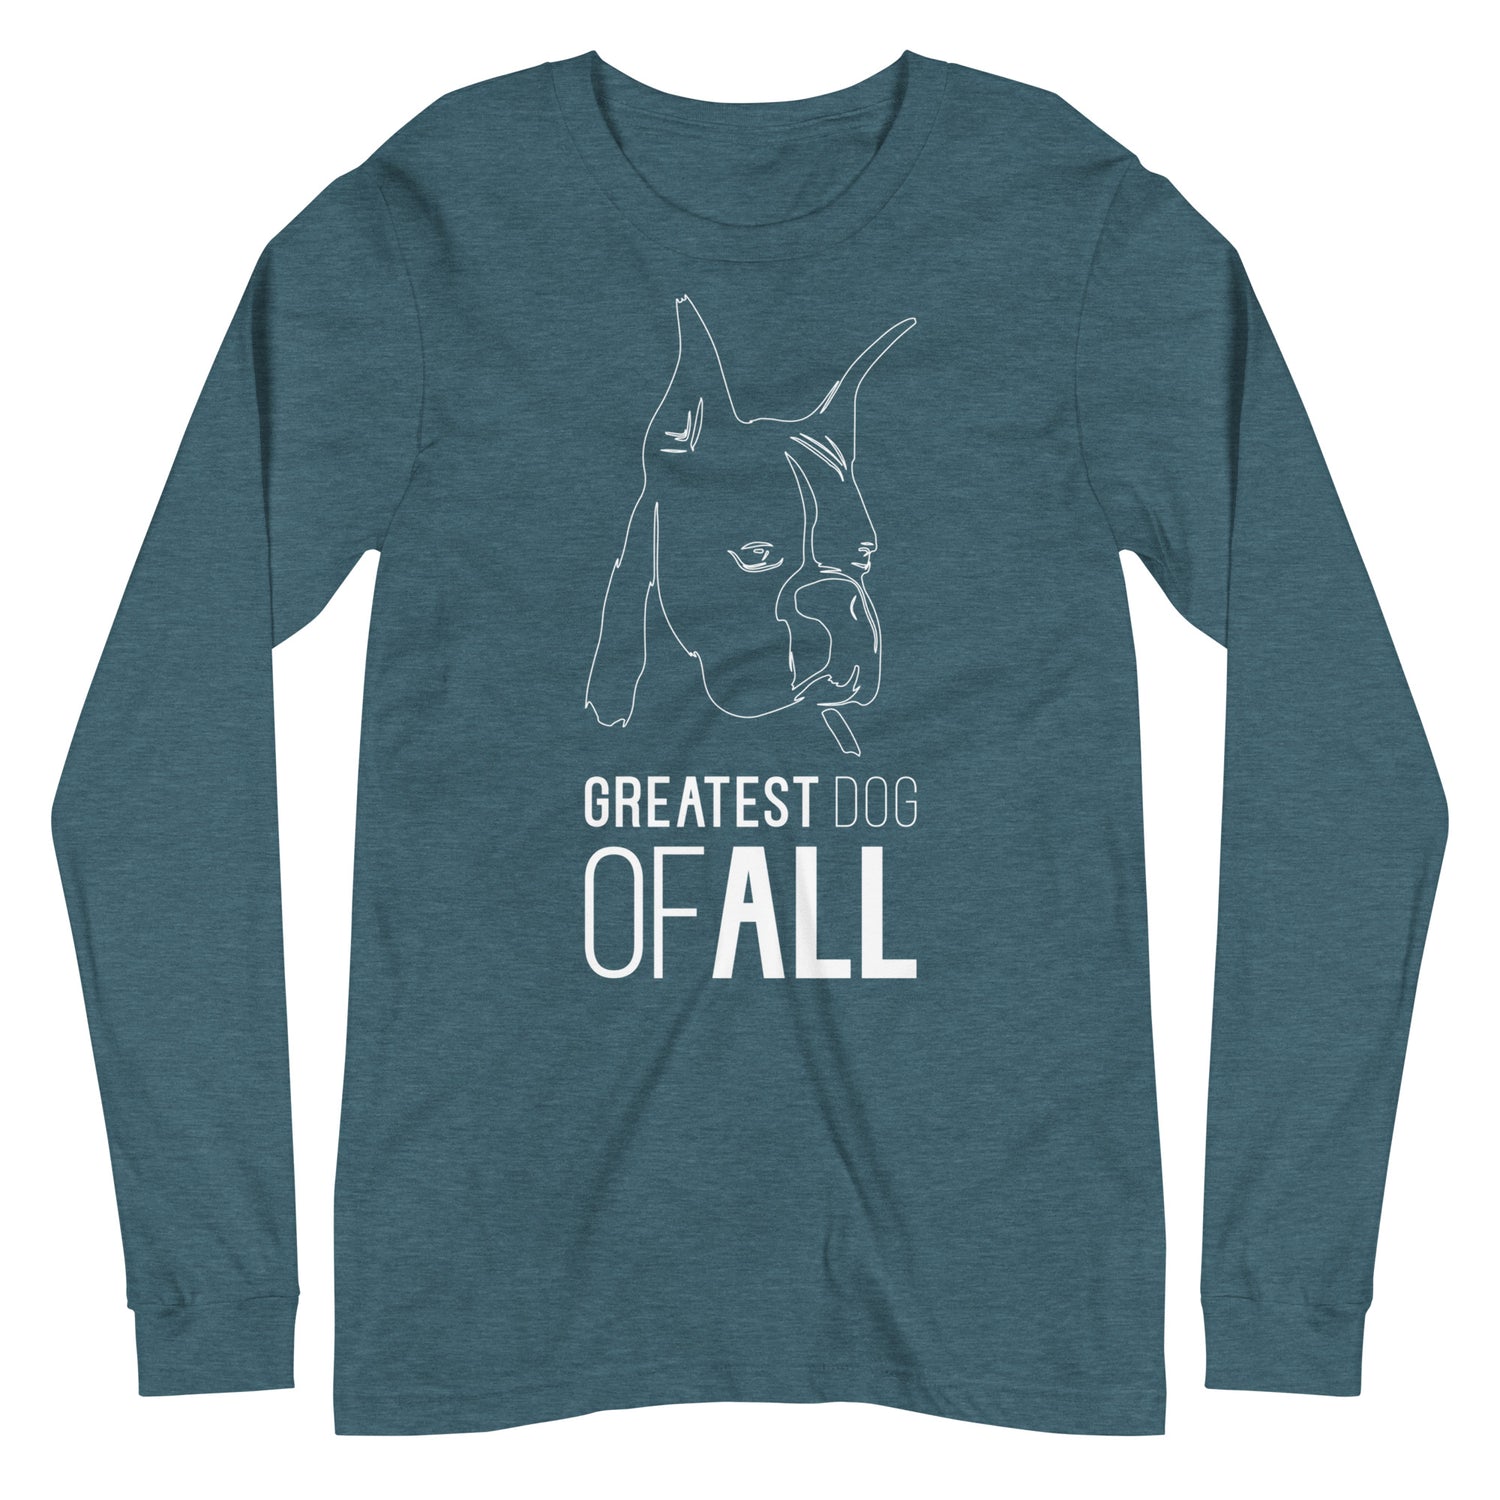 White line Boxer face with Greatest Dog of All caption on unisex heather deep teal long sleeve t-shirt